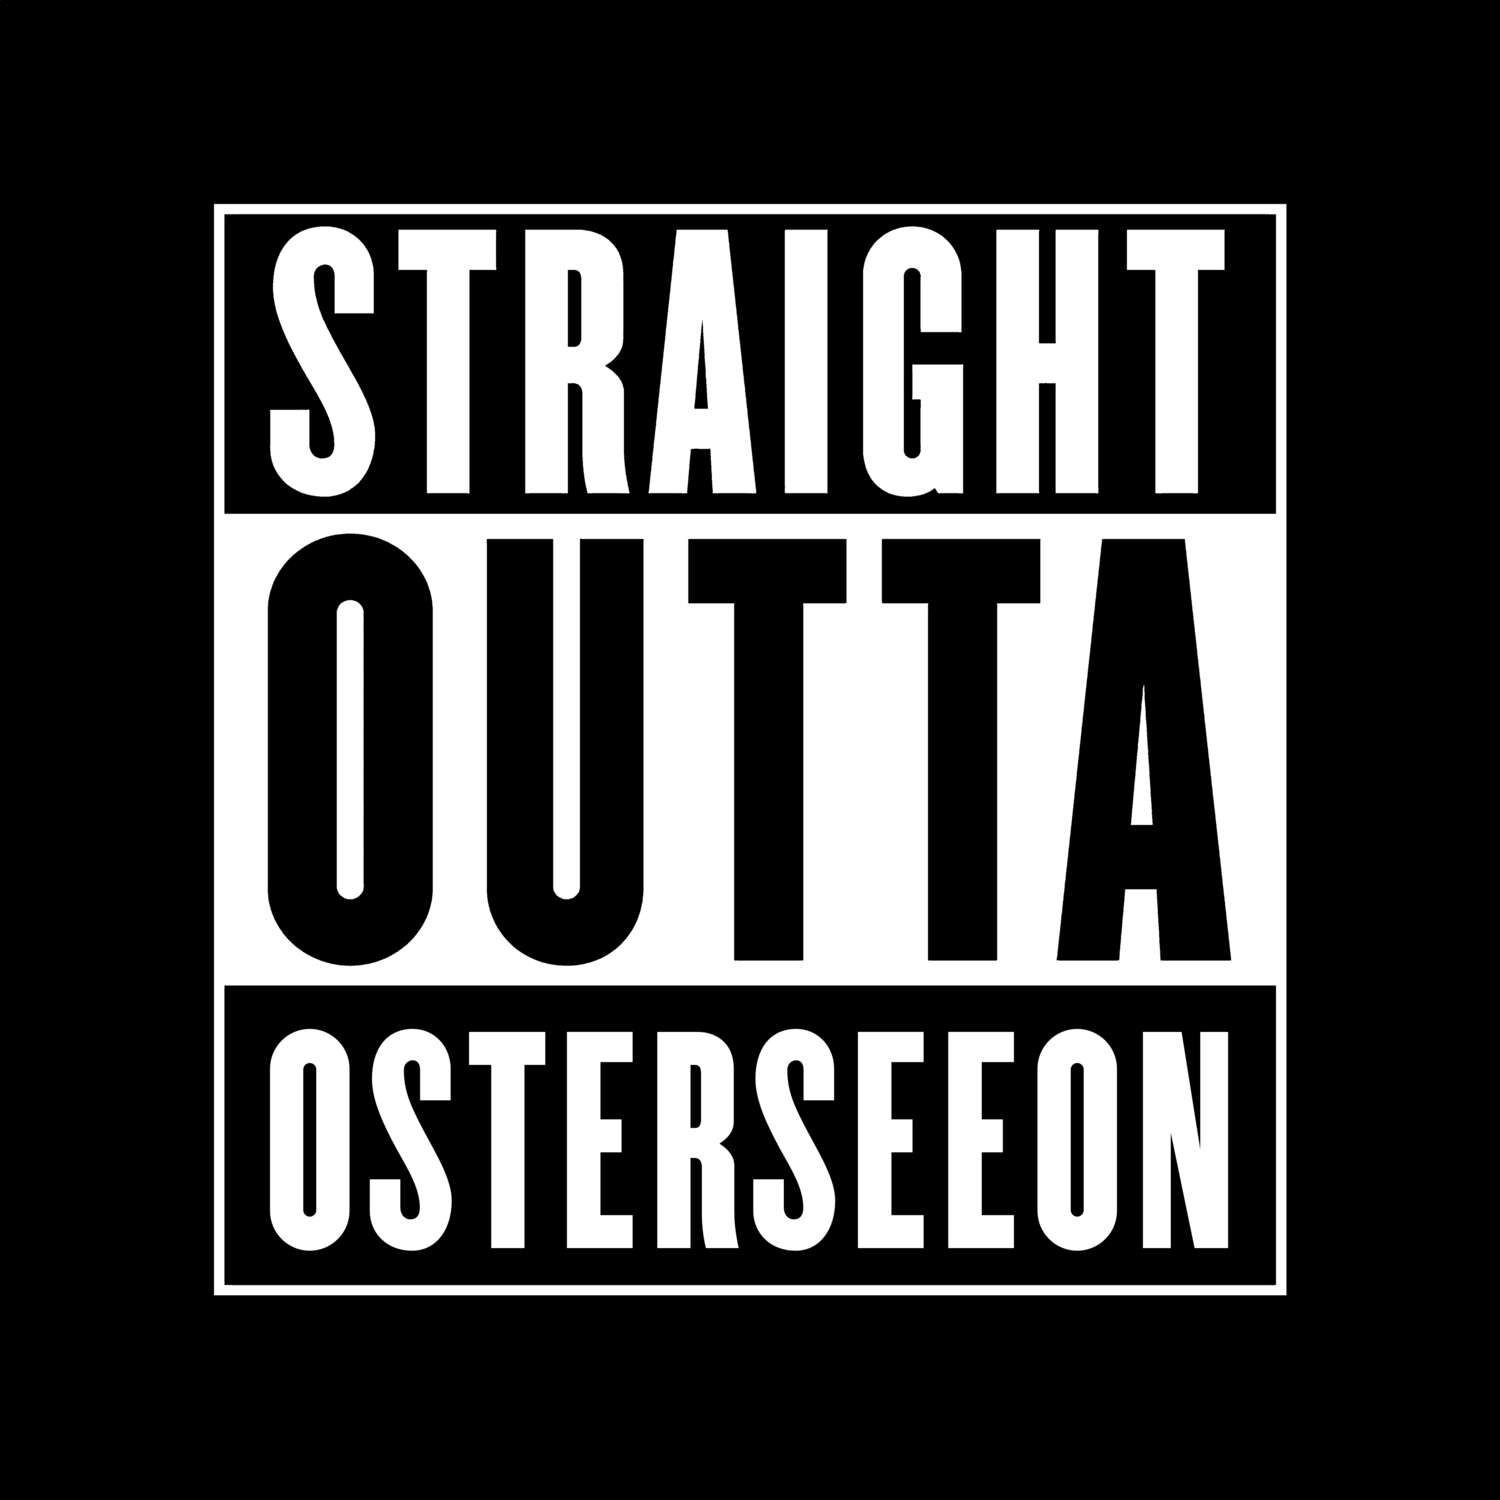 Osterseeon T-Shirt »Straight Outta«